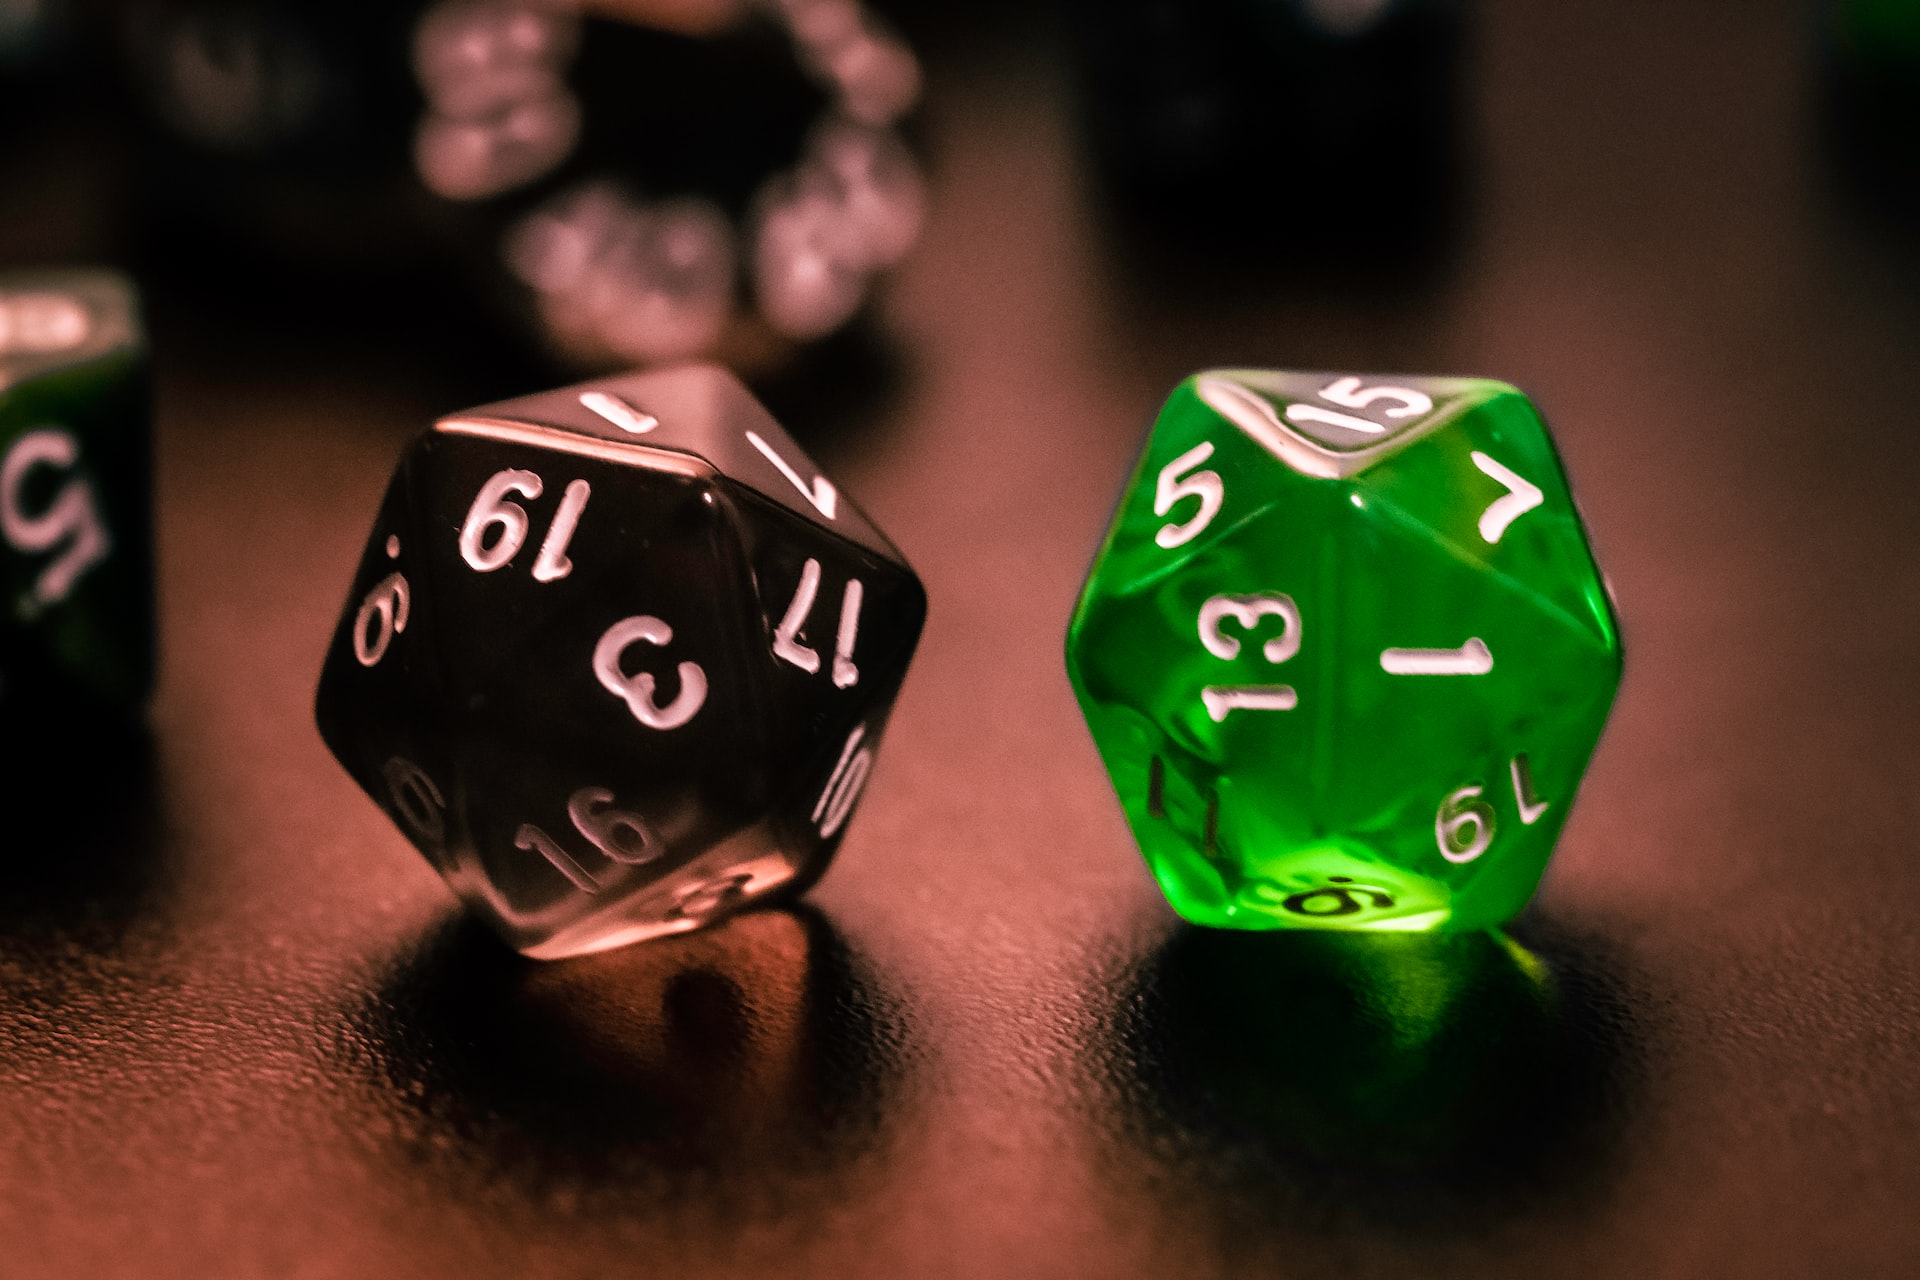 Image of a pair of dice, representing luck